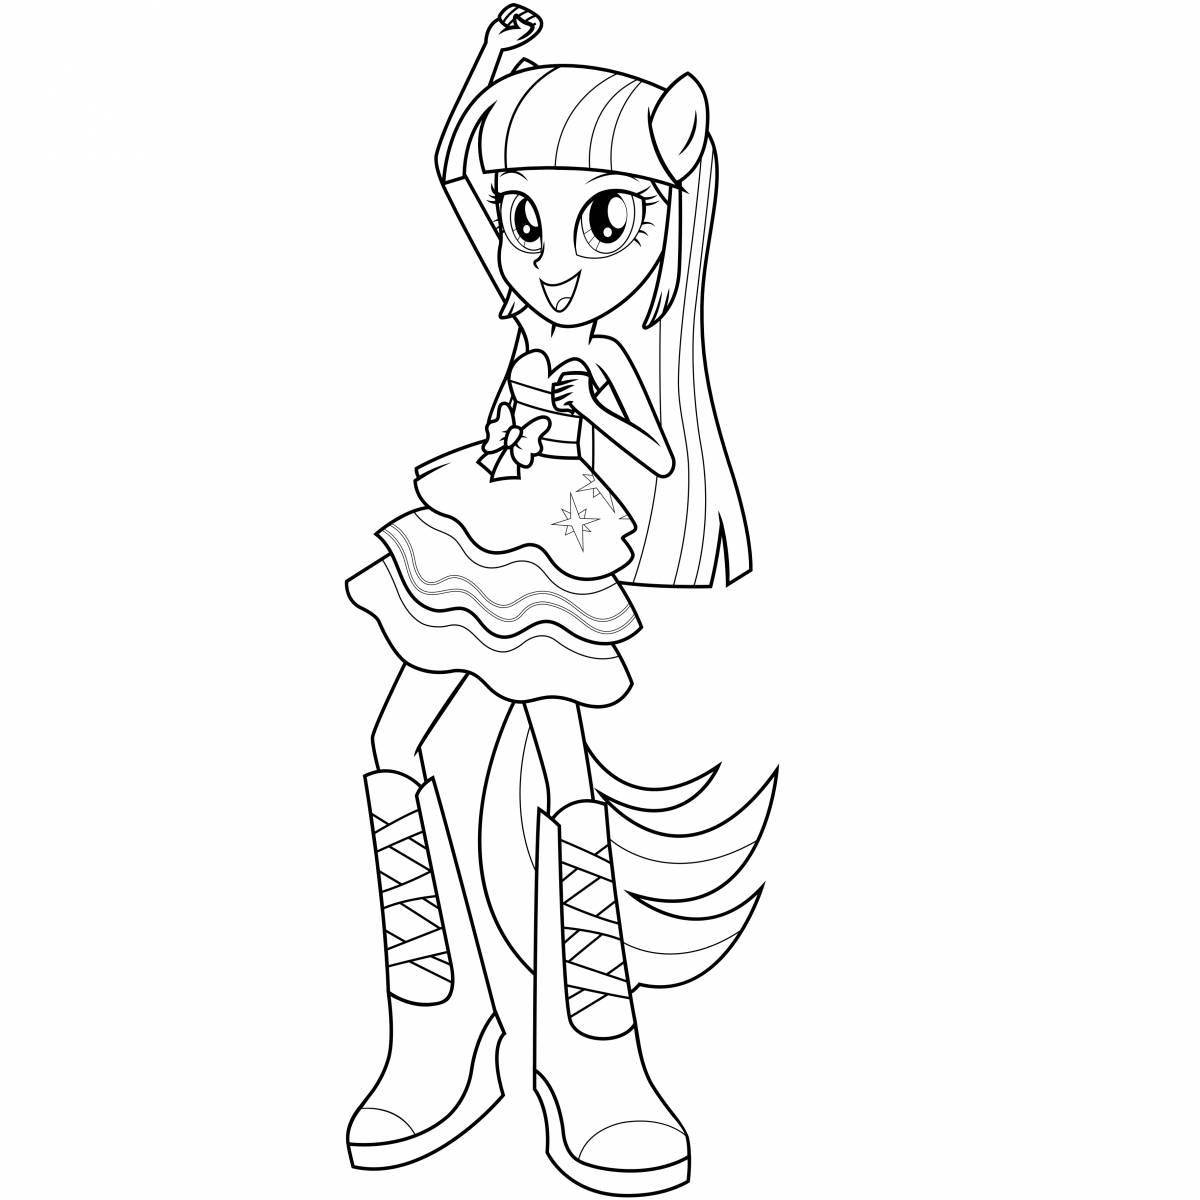 Coloring page magnificent pony man